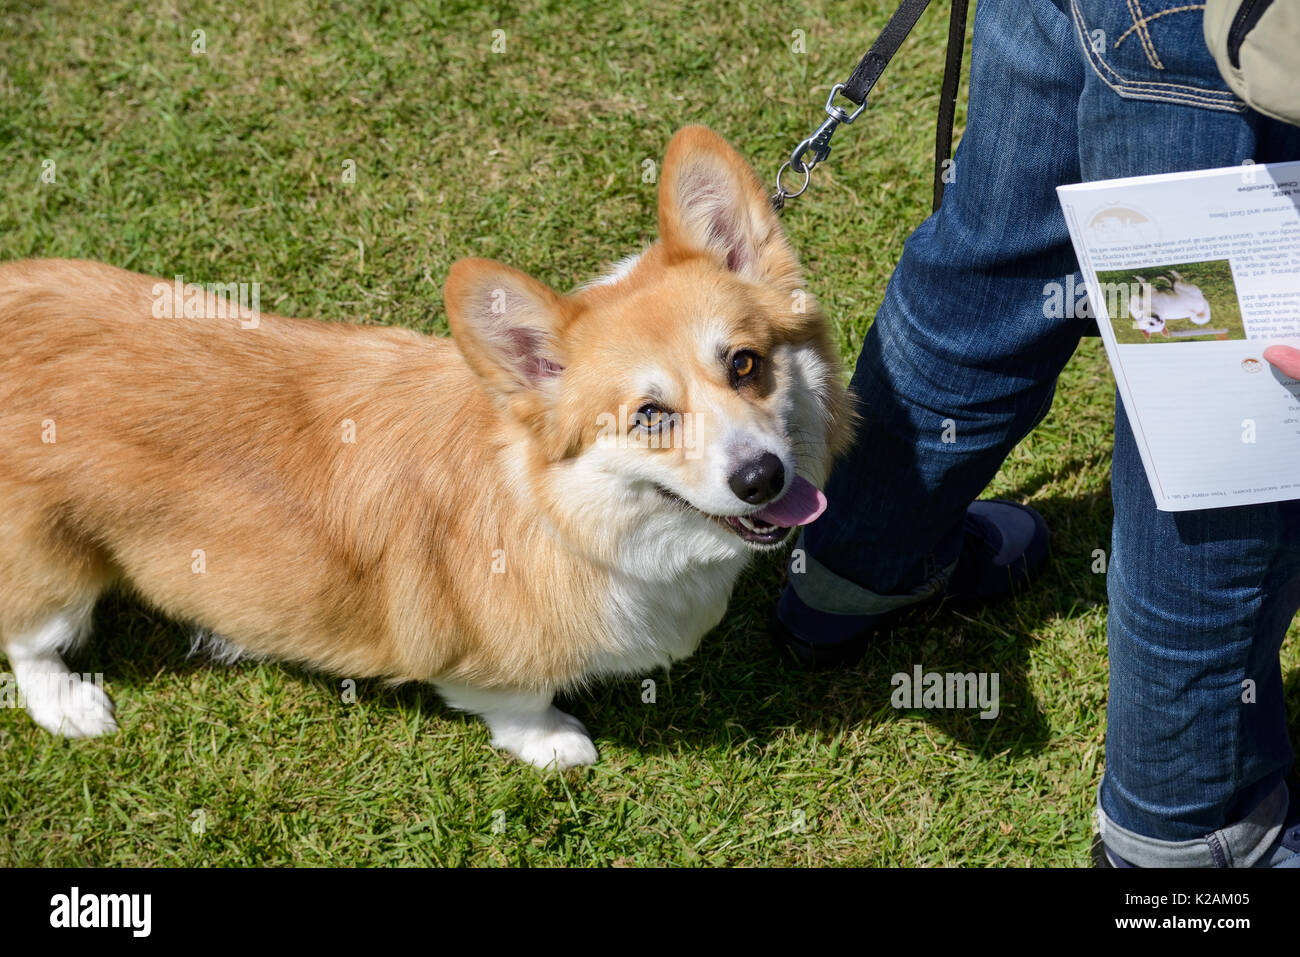 A pembroke welsh corgi dog aged 3 years old at a village dog show in England. Stock Photo